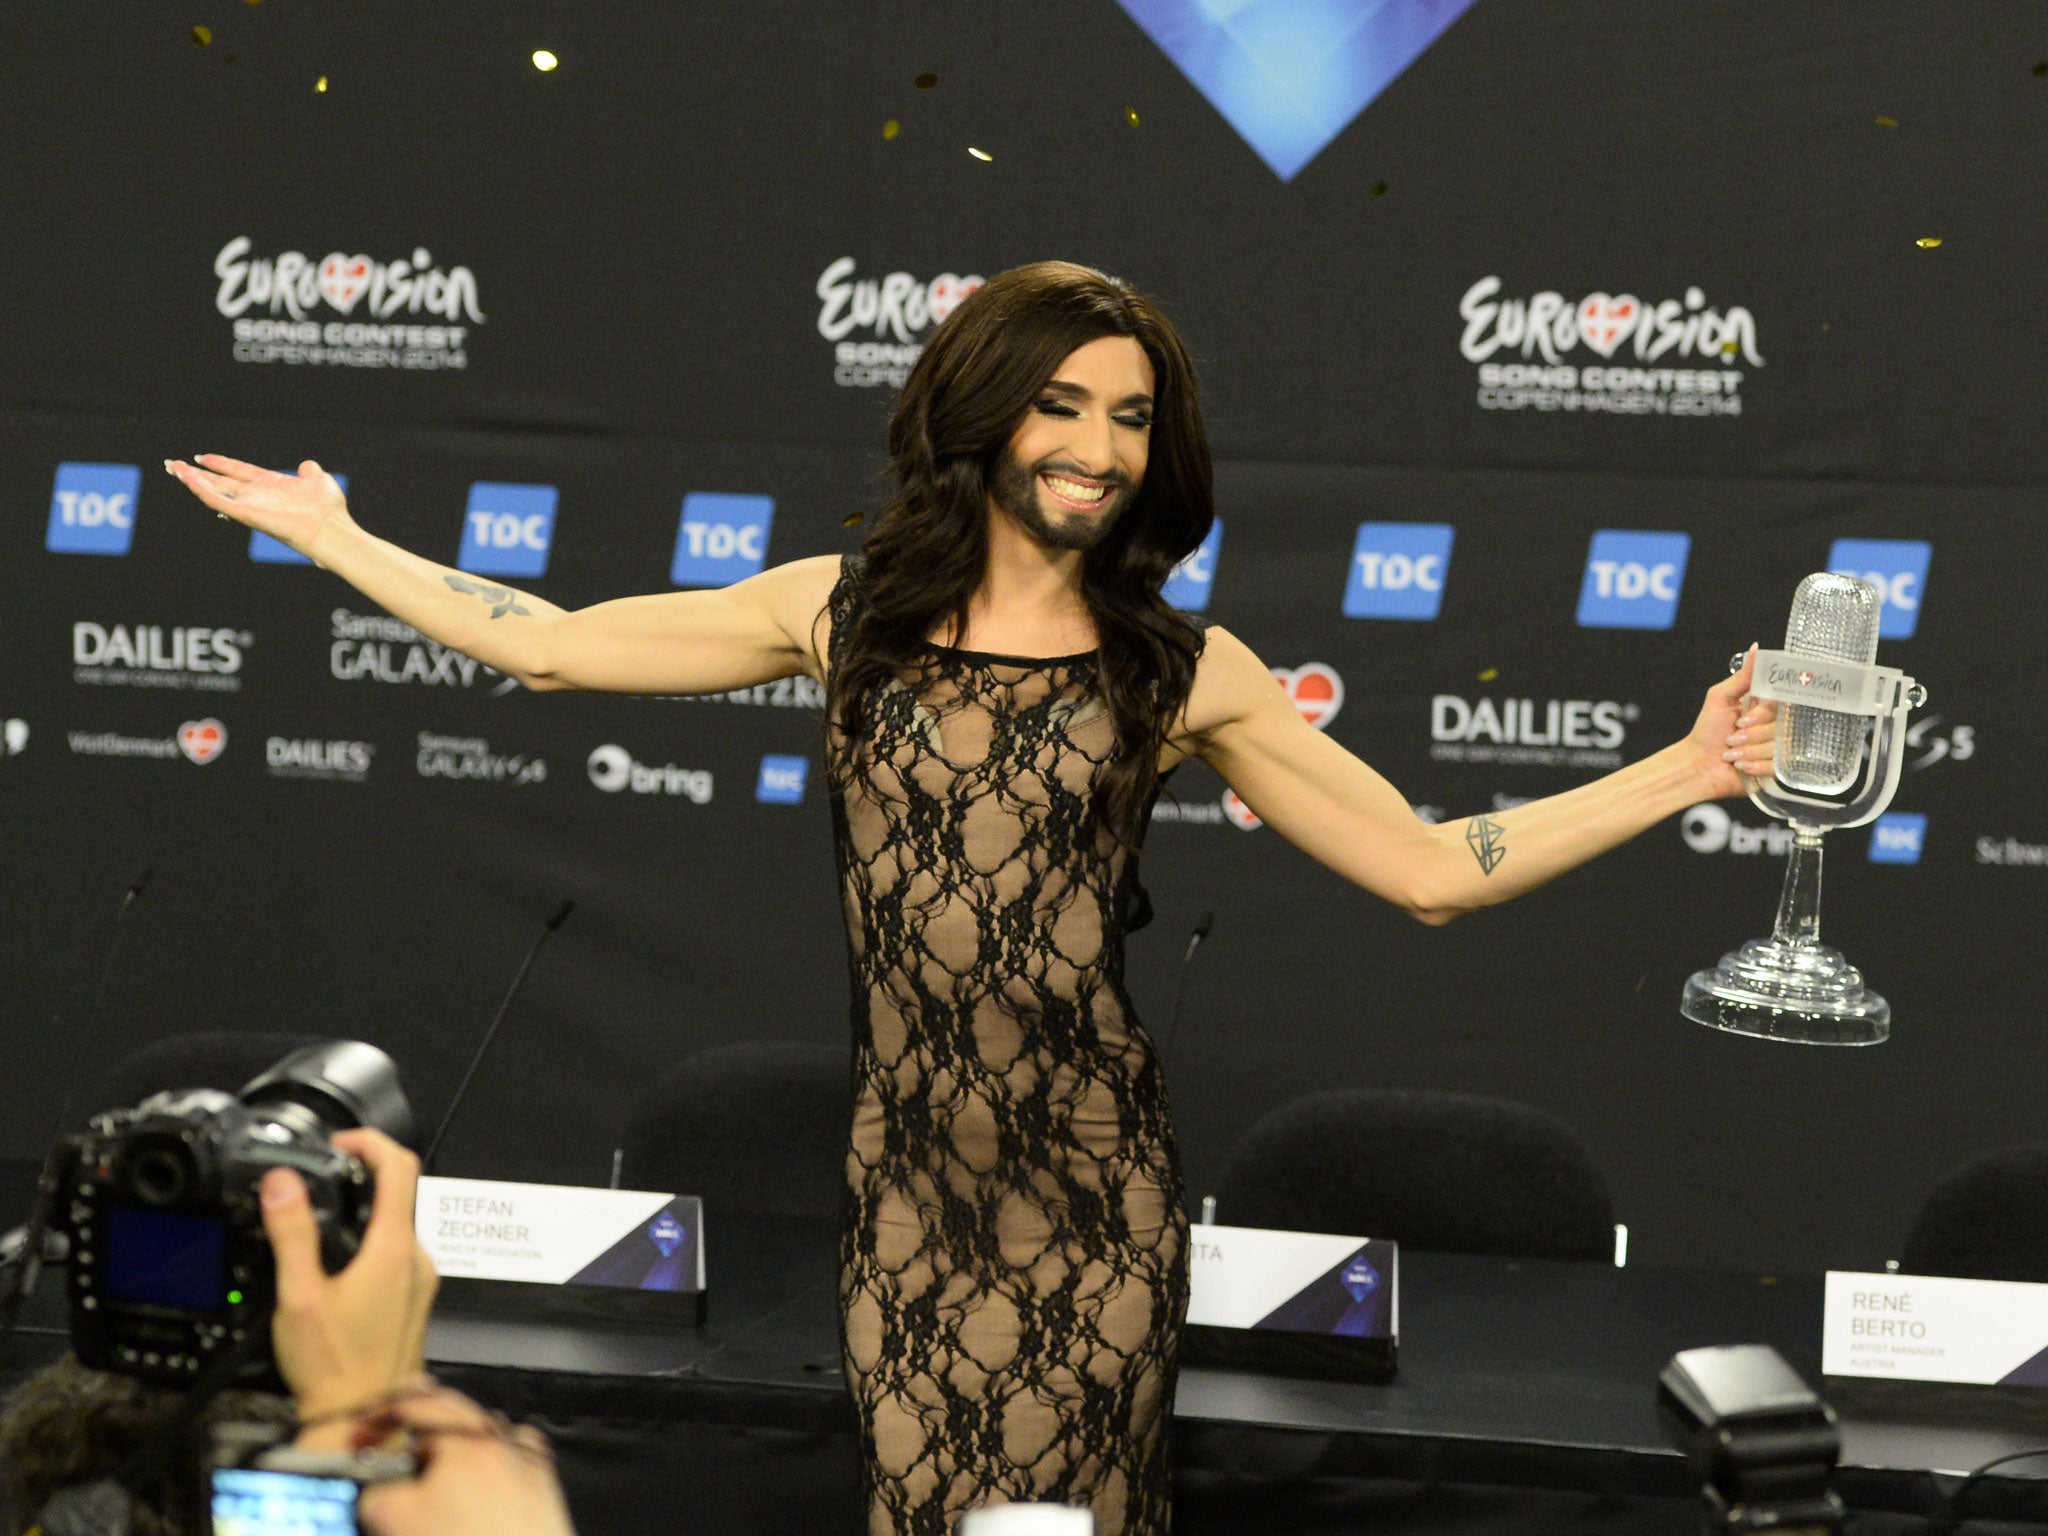 Conchita Wurst representing Austria poses with the trophy after a press conference after winning the Eurovision Song Contest 2014 Grand Final in Copenhagen